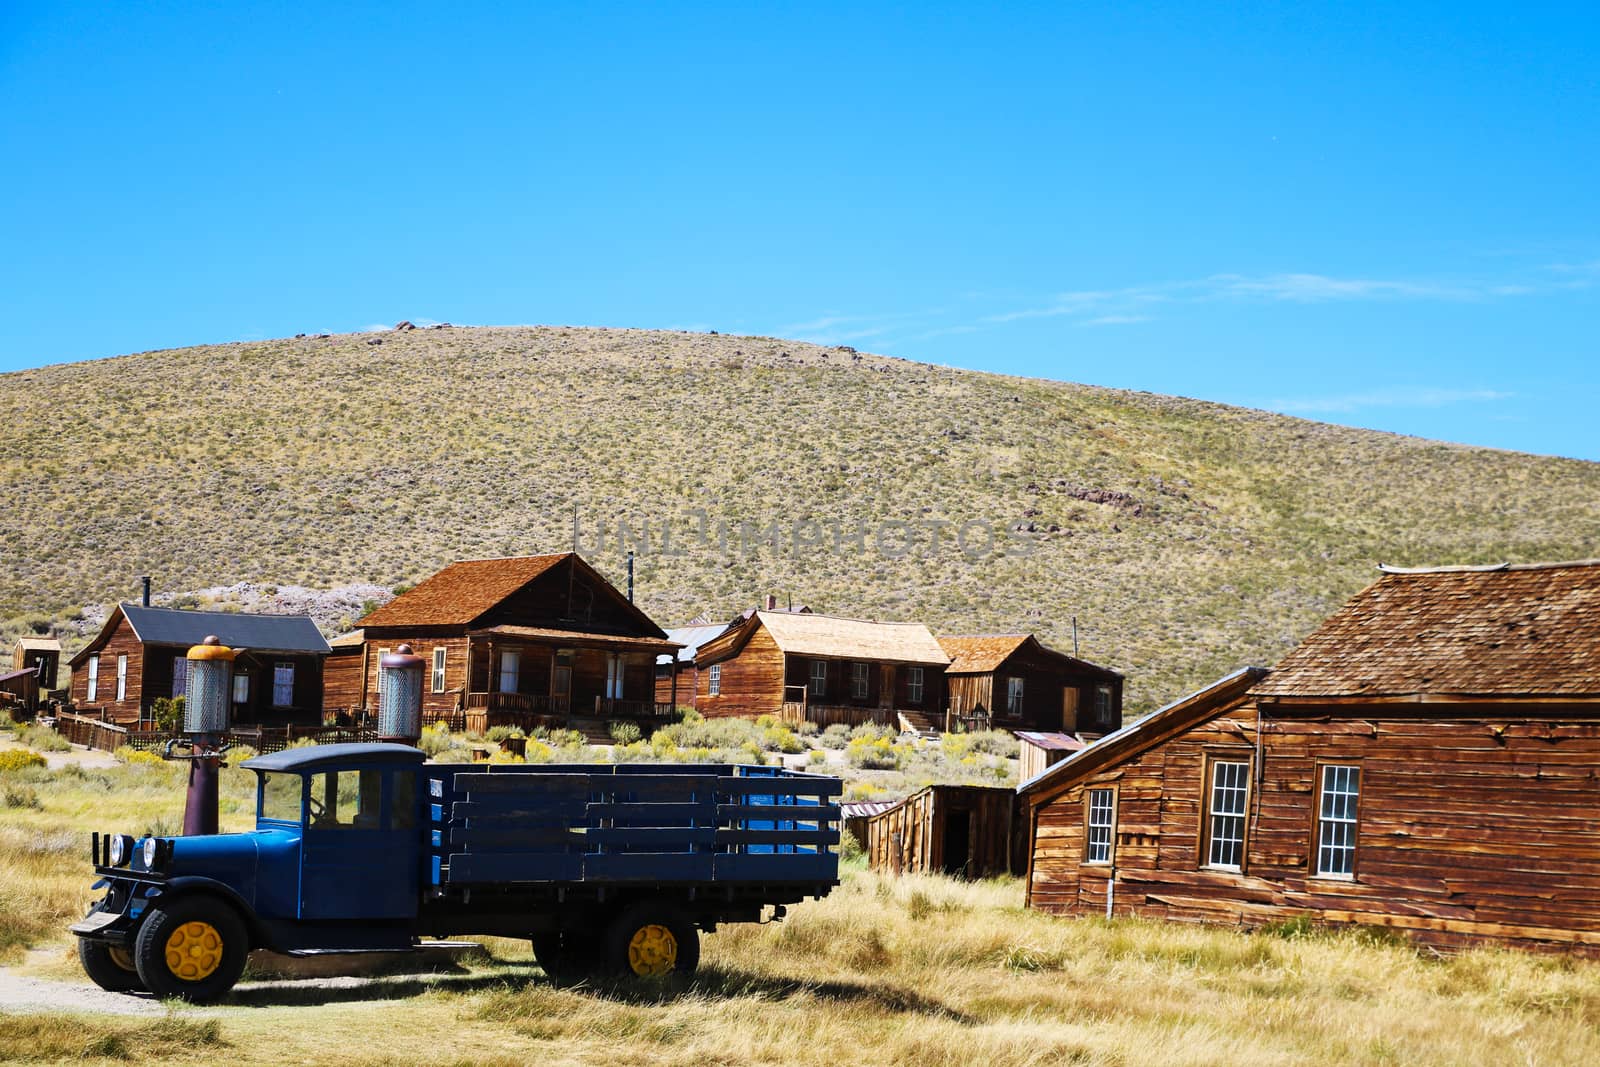 The ghost town of Bodie - California, USA